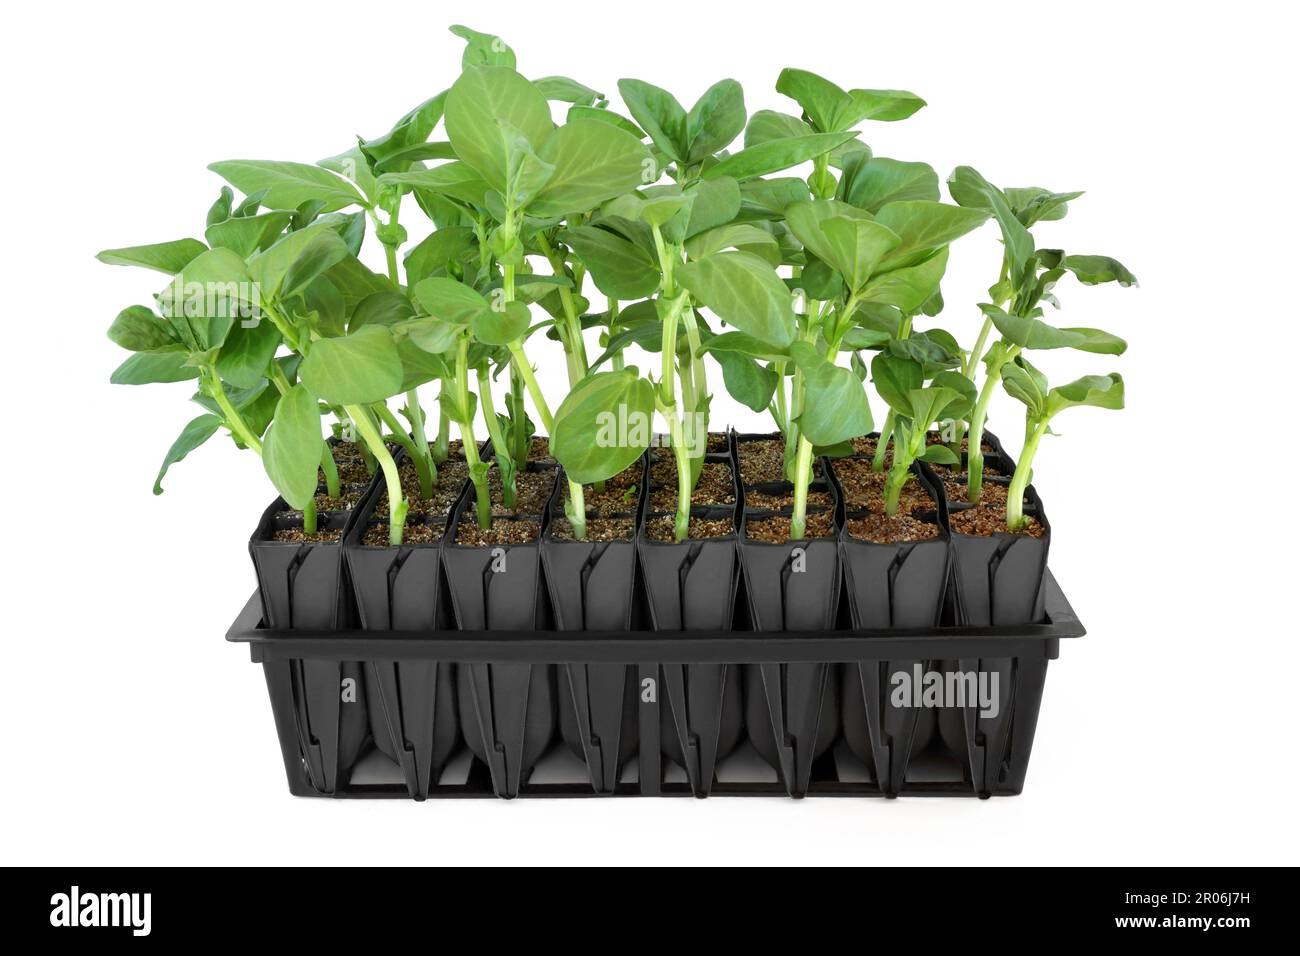 Broad bean plants growing in root trainer to develop growth prior to planting out. Upright module in black plastic on white background. Stock Photo